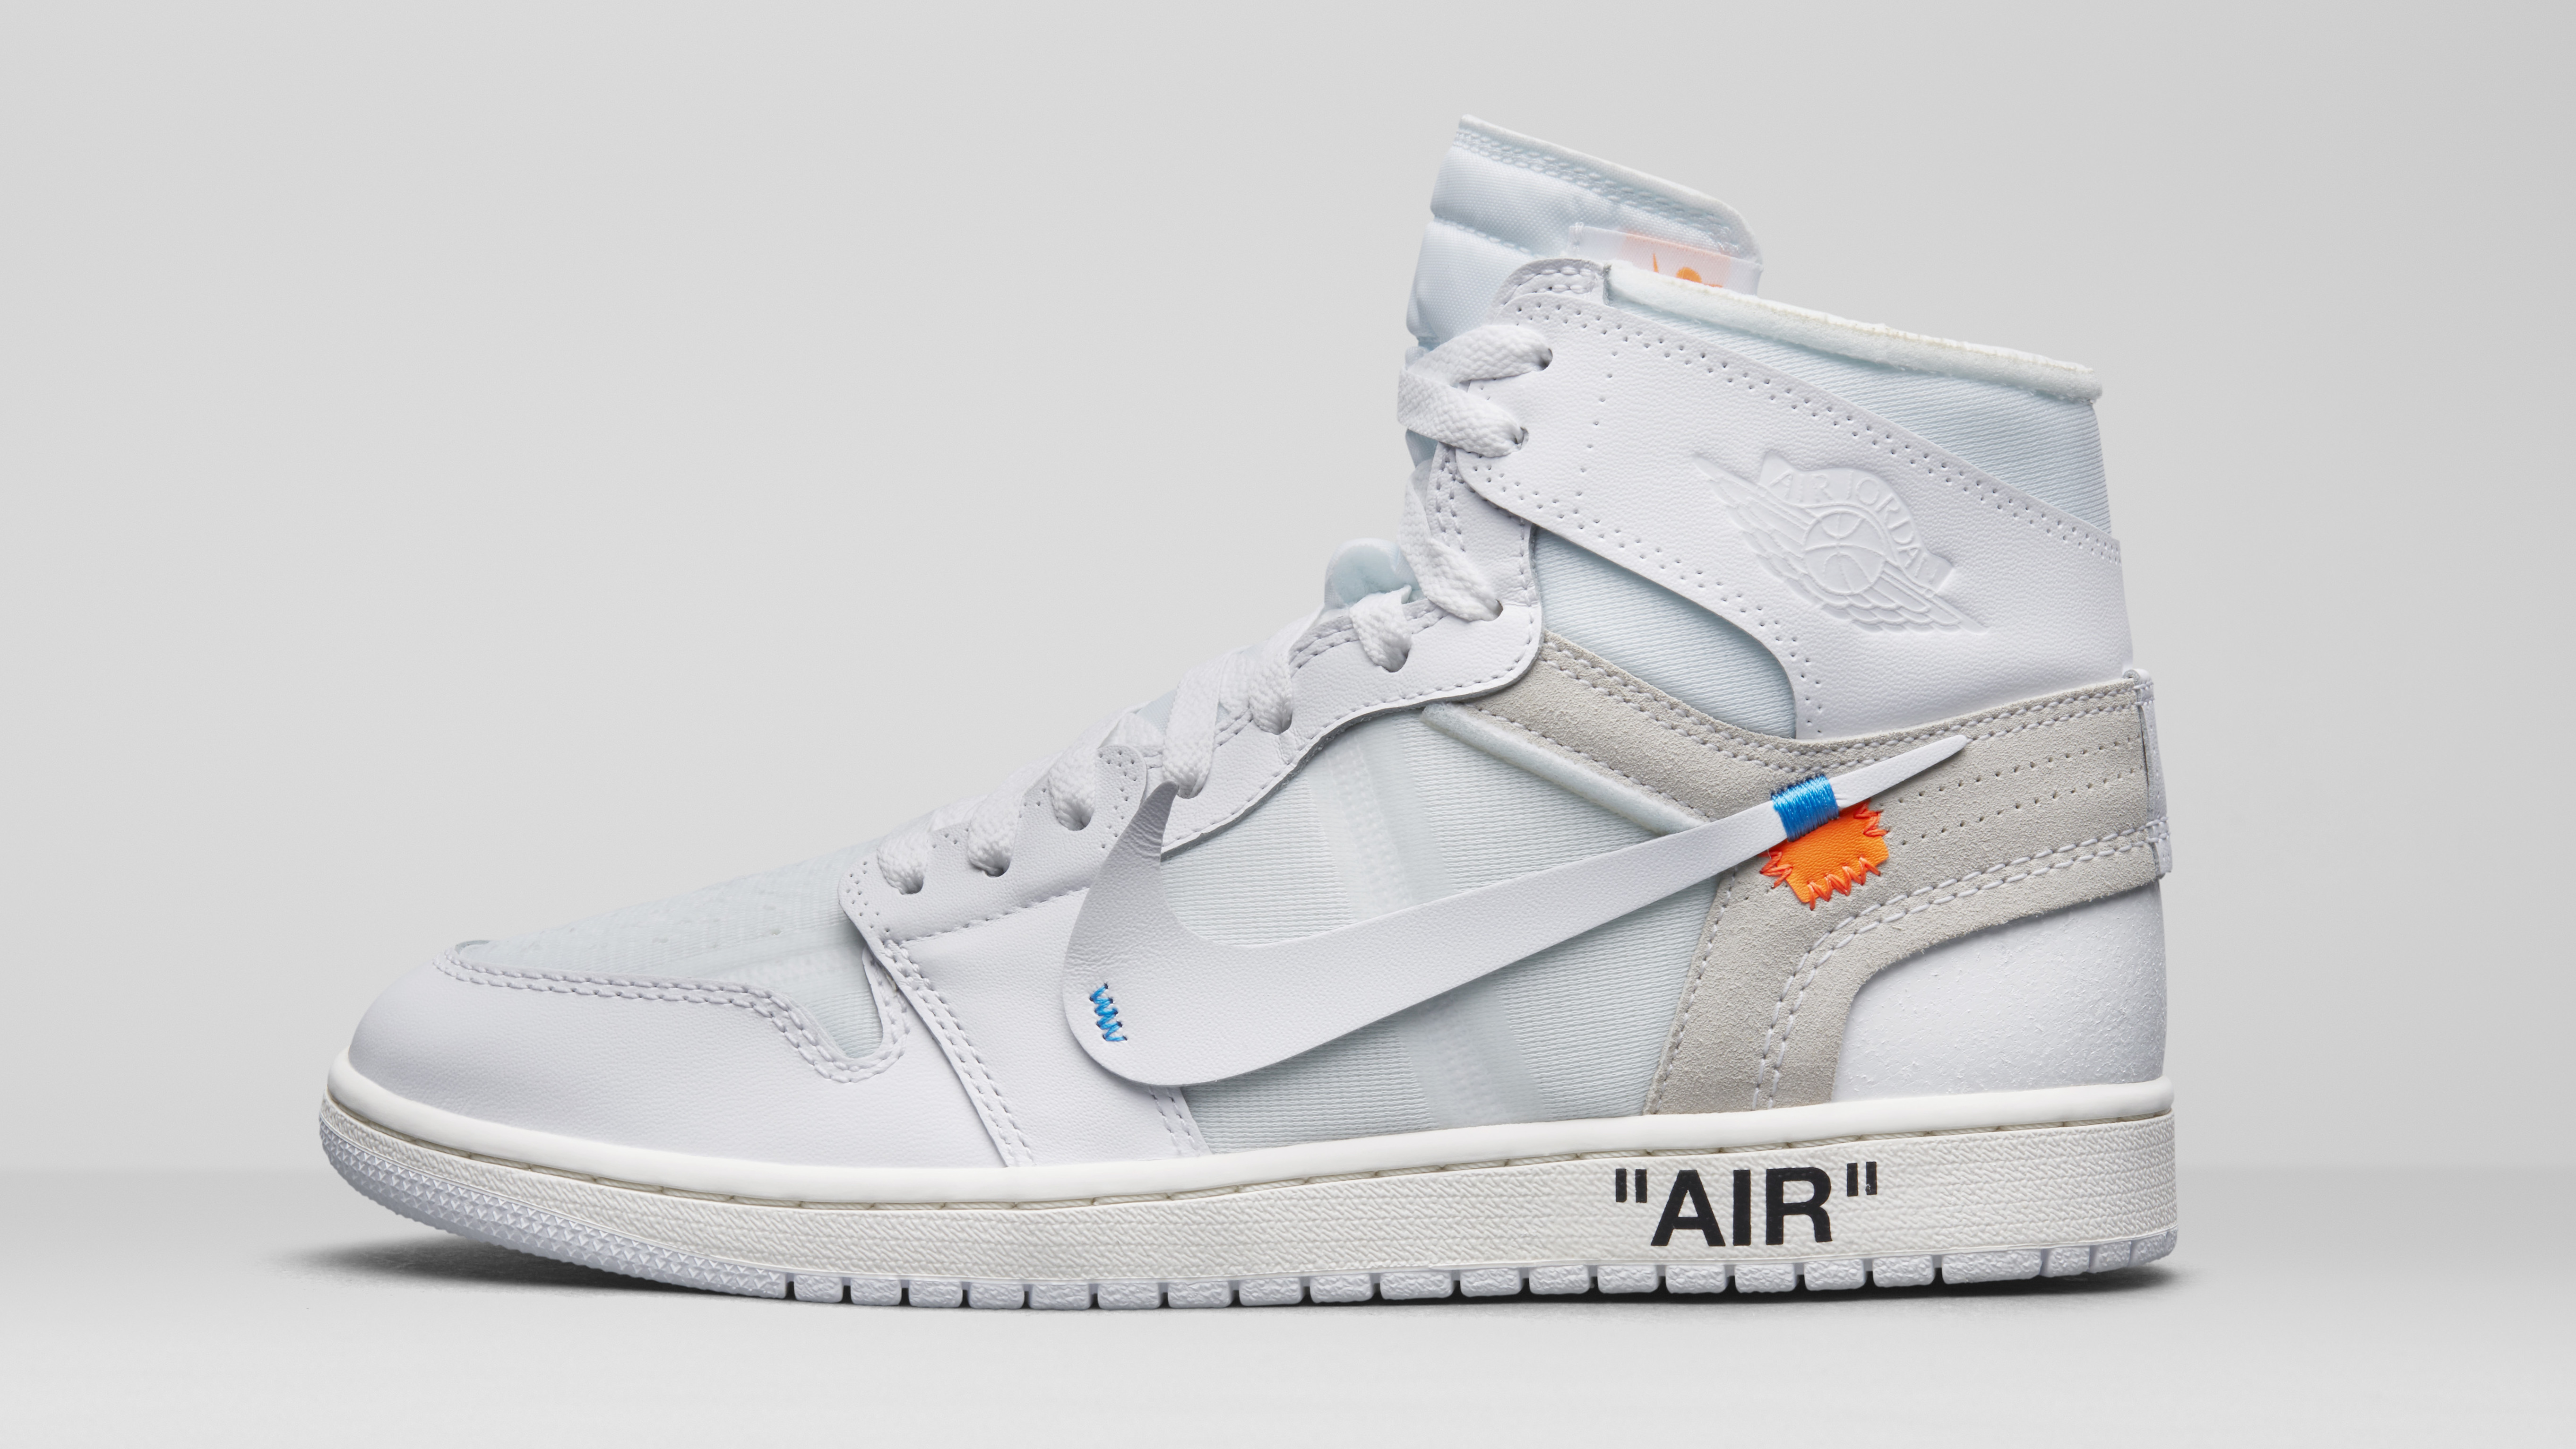 Off White Air Jordan 1 AQ0818-100 Release Date | Sole Collector ليمونيتا